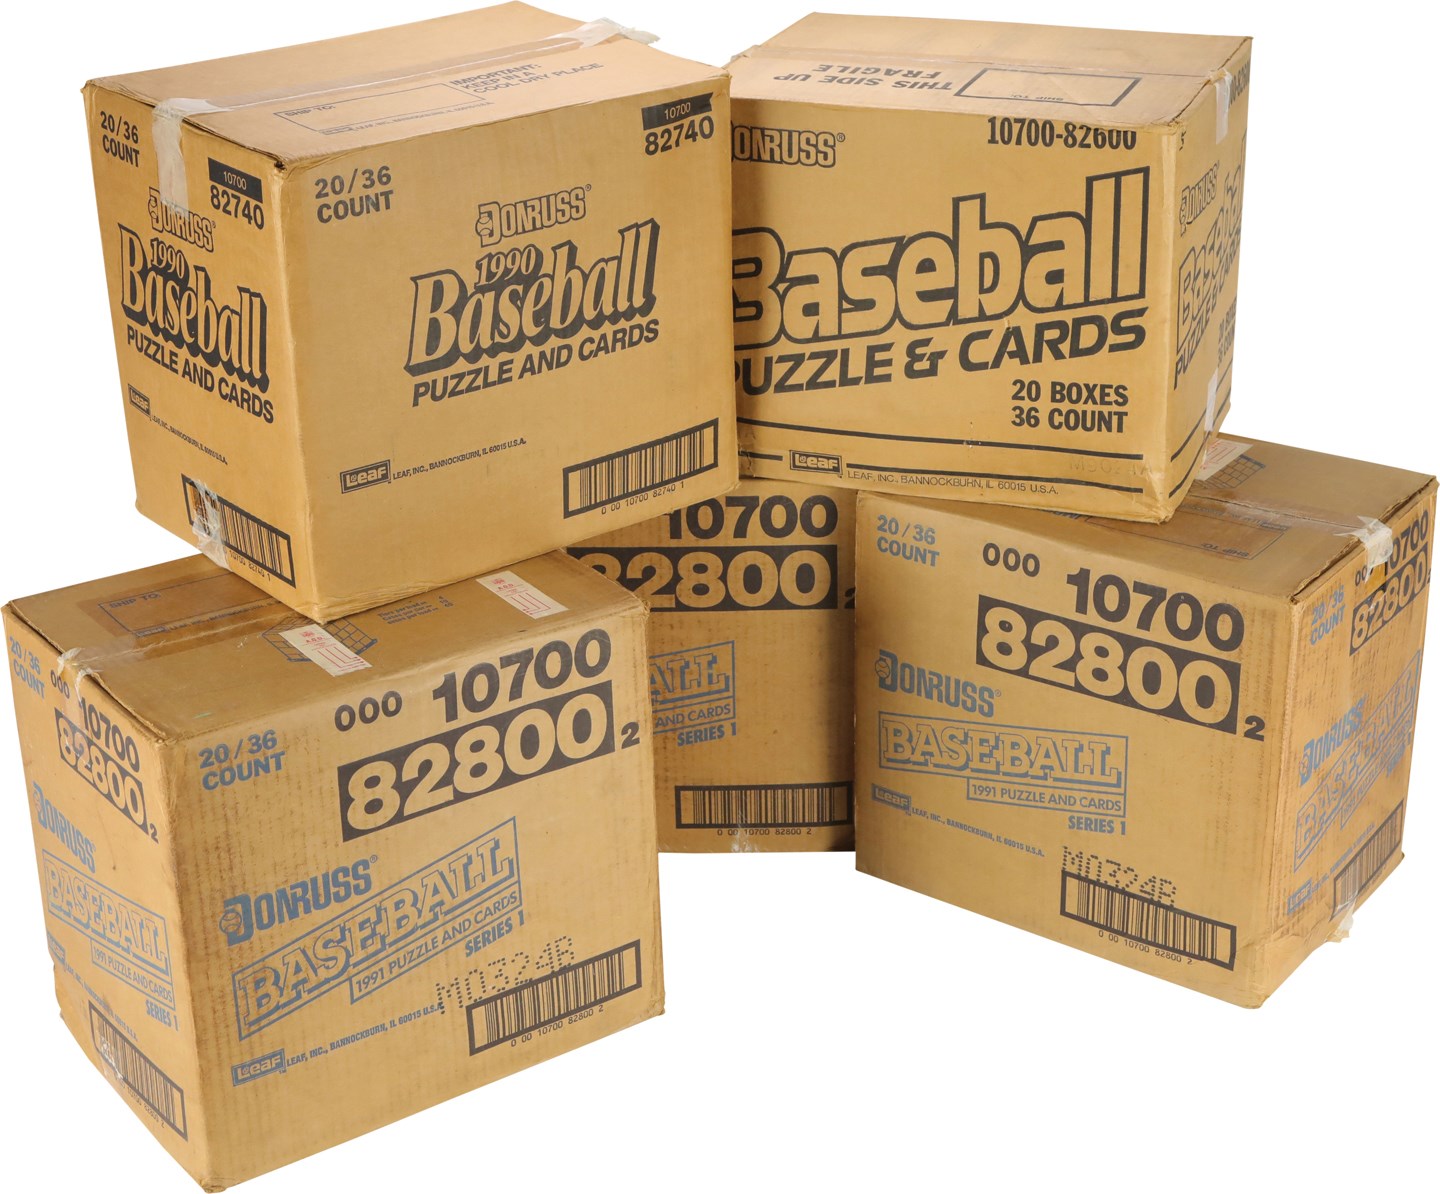 Unopened Boxes, Packs And Cases - 1989-1991 Donruss Baseball Wax Box Cases (5)